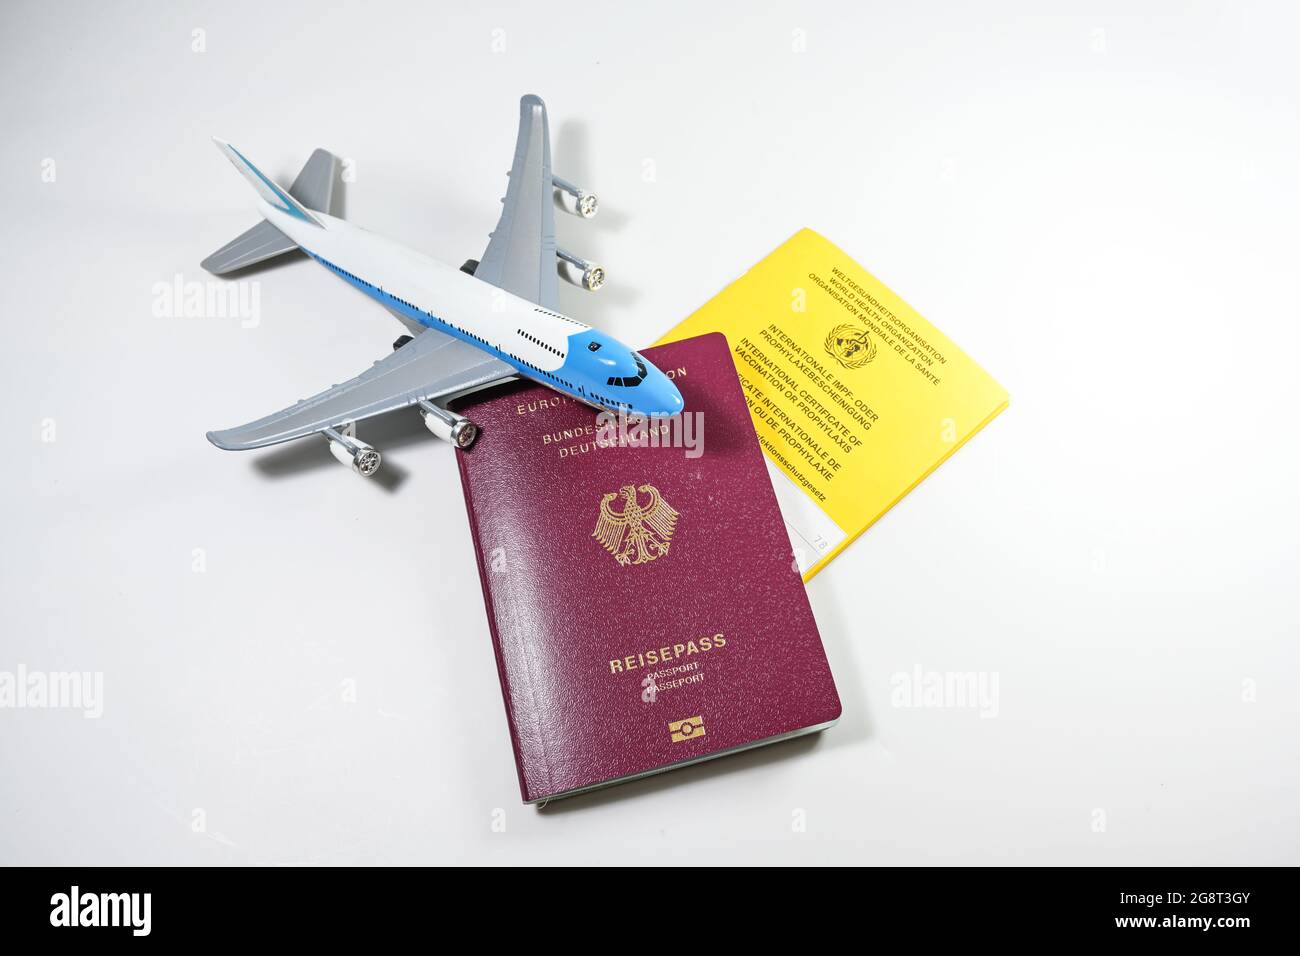 German Passport, yellow International Certificate of Vaccination book and a toy airplane on a light gray background, concept for travel requirements d Stock Photo